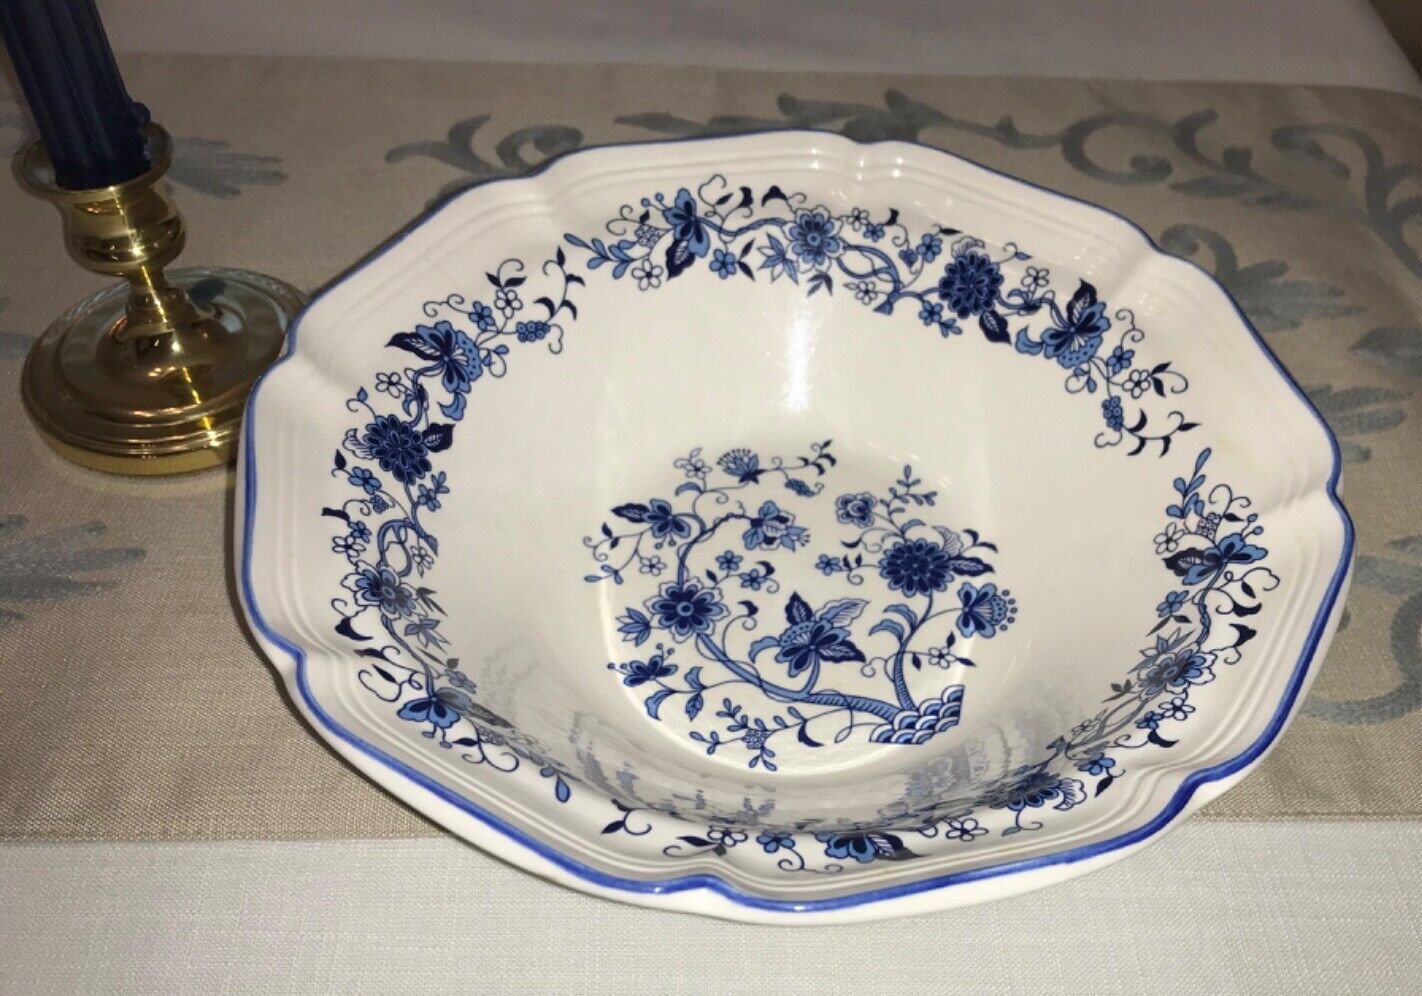 BLUE ONION VTG F.W. WOOLWORTH 9” SERVING BOWL KOREA BLUE & WHITE SCALLOPED GUC